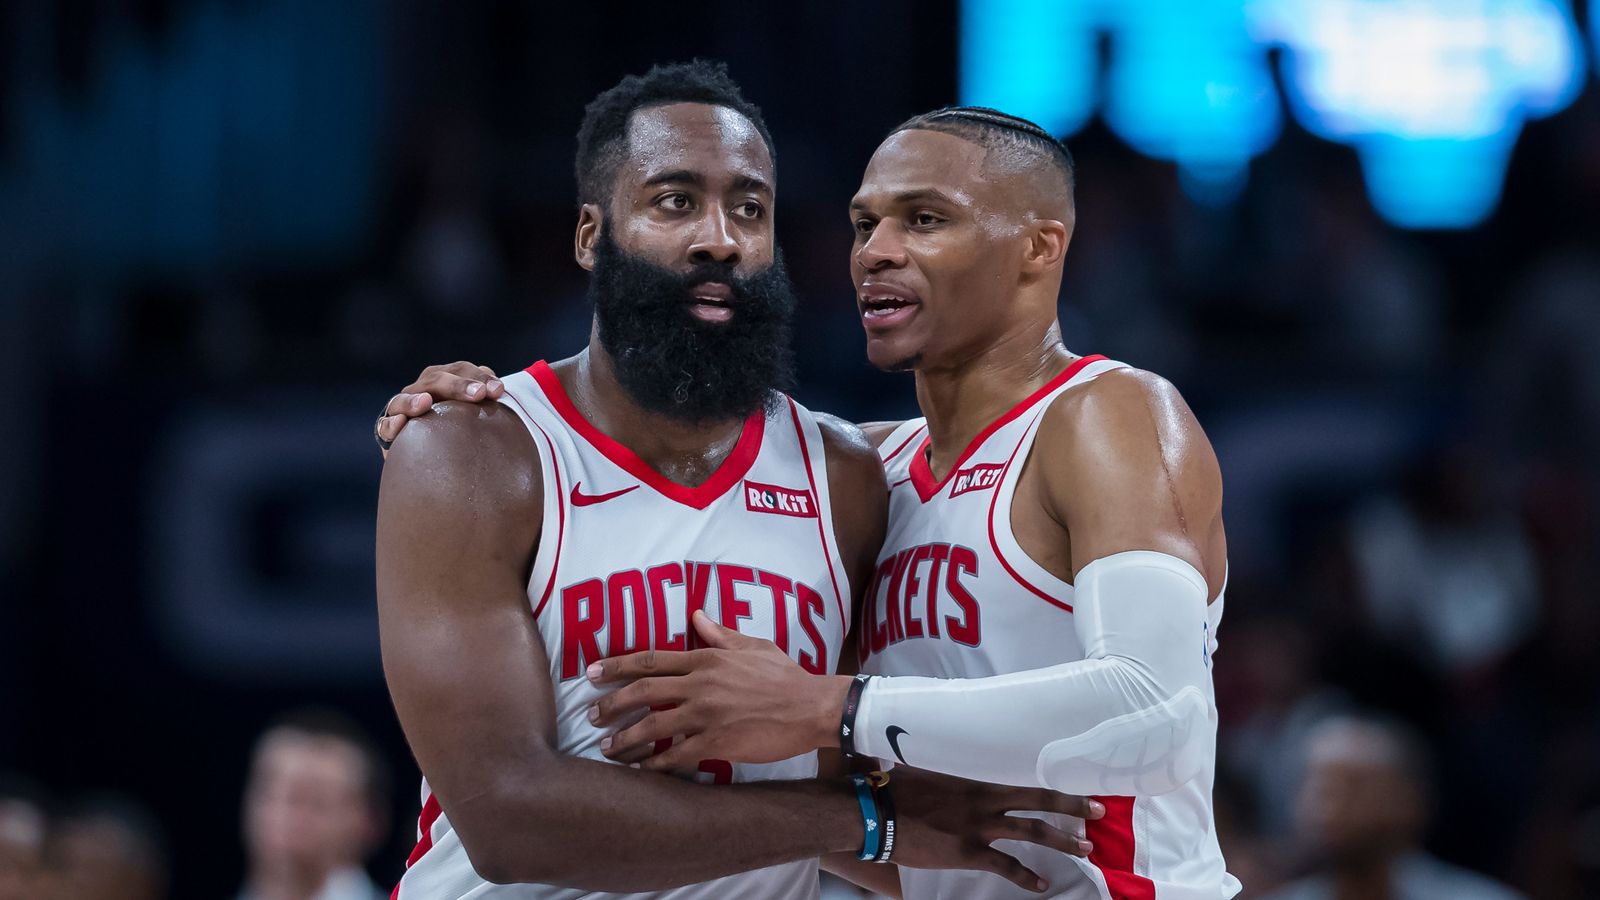 James Harden For MVP: Why Rockets Star Edges Russell Westbrook